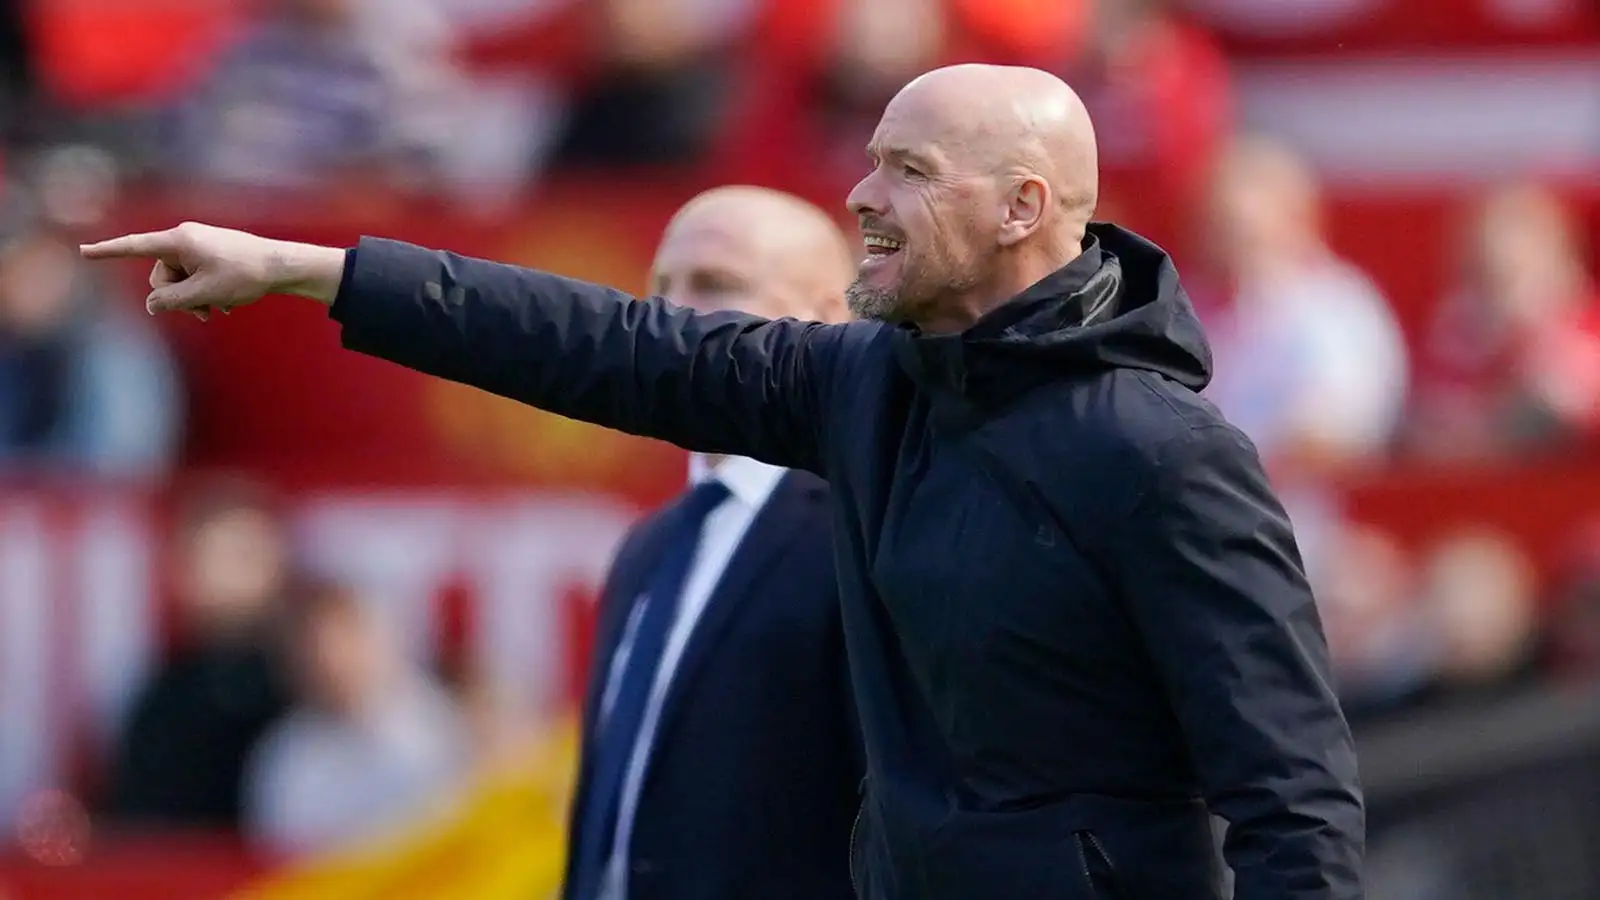 Manchester United's head coach Erik ten Hag gestures during the English Premier League soccer match between Manchester United and Everton, at the Old Trafford stadium in Manchester, England, Saturday, April 8, 2023.